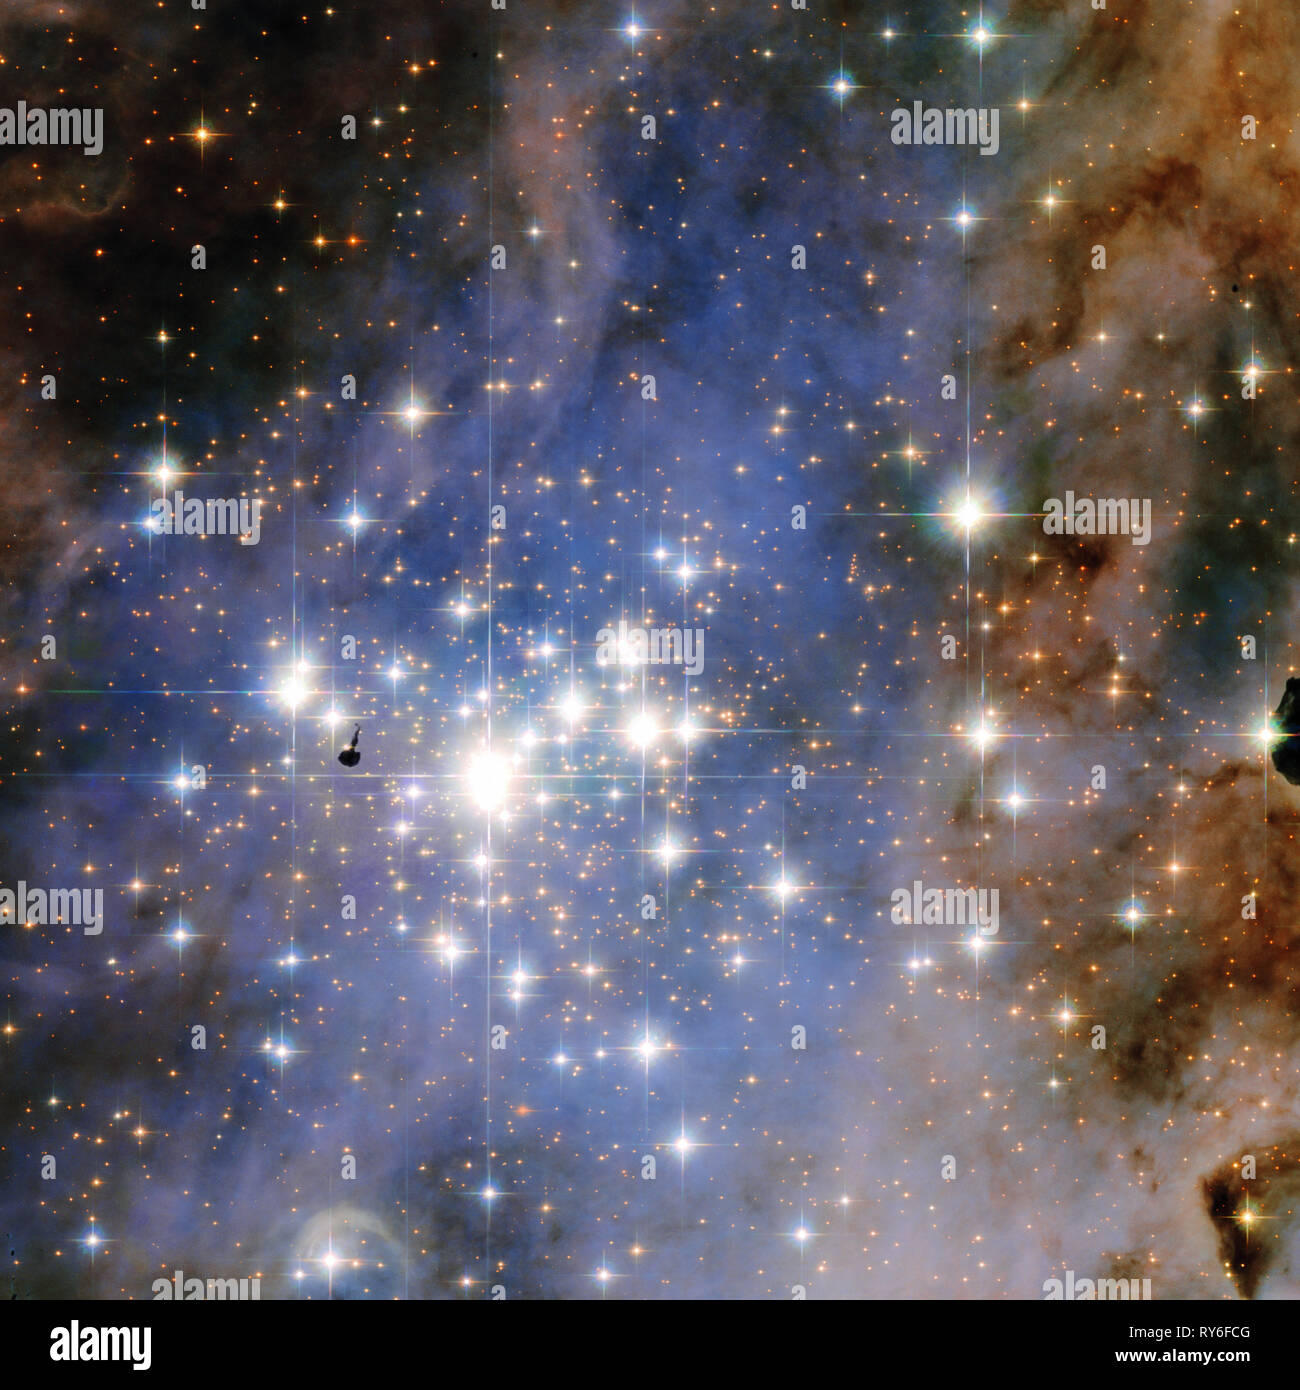 Trumpler 14, a huge star forming region located 8,000 light-years away in the Carina Nebula, contains one of the highest concentrations of massive, lu Stock Photo